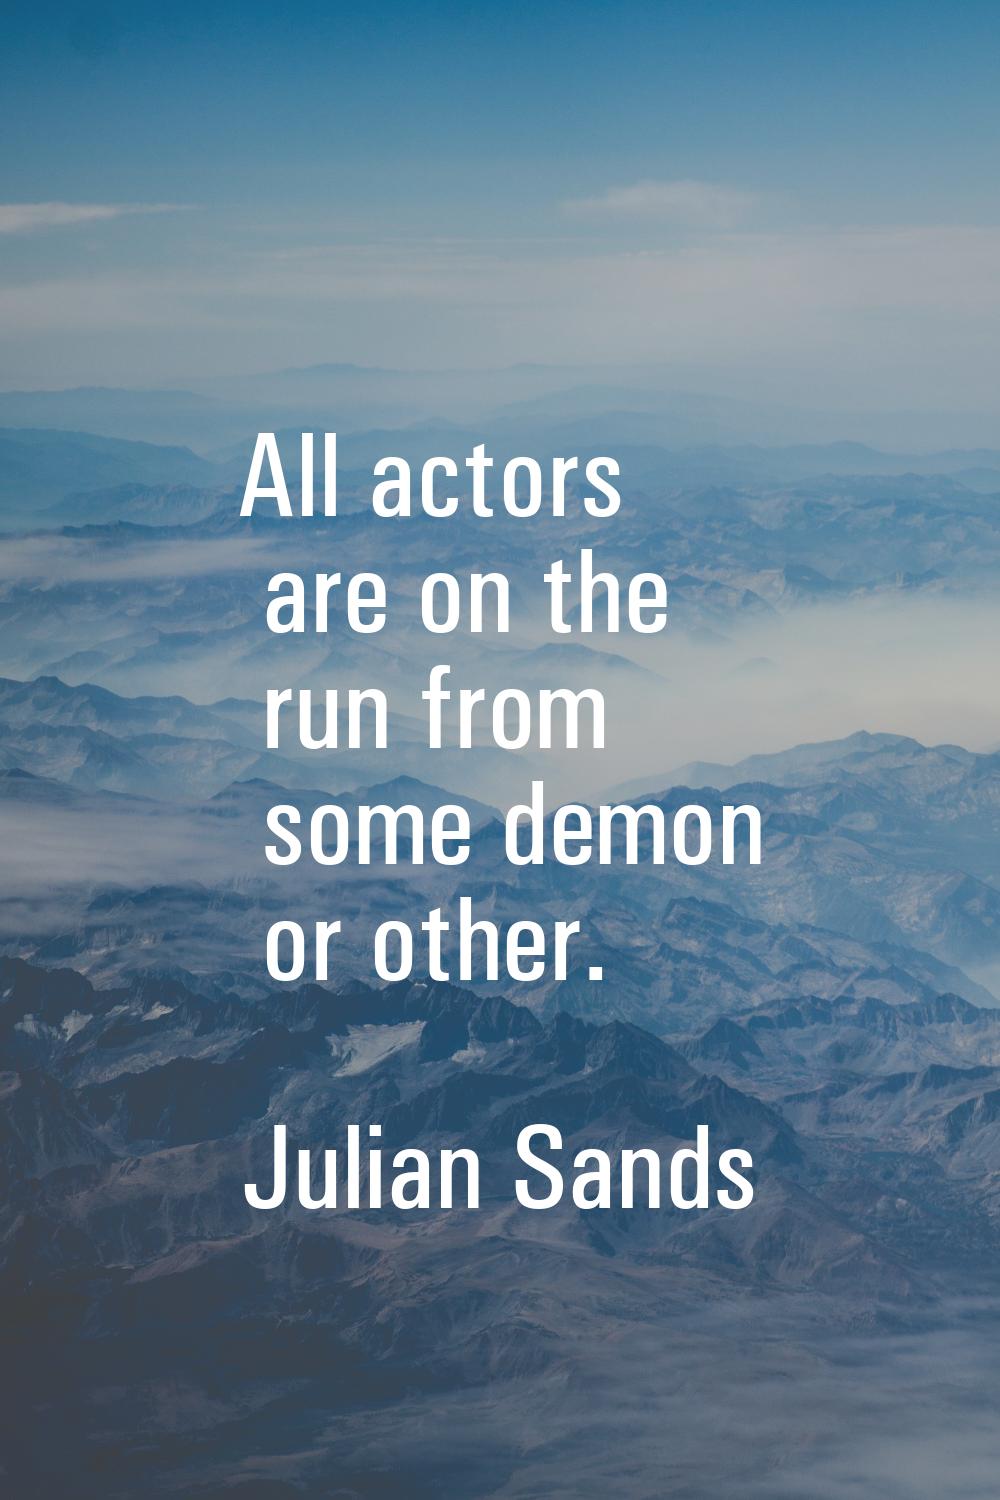 All actors are on the run from some demon or other.